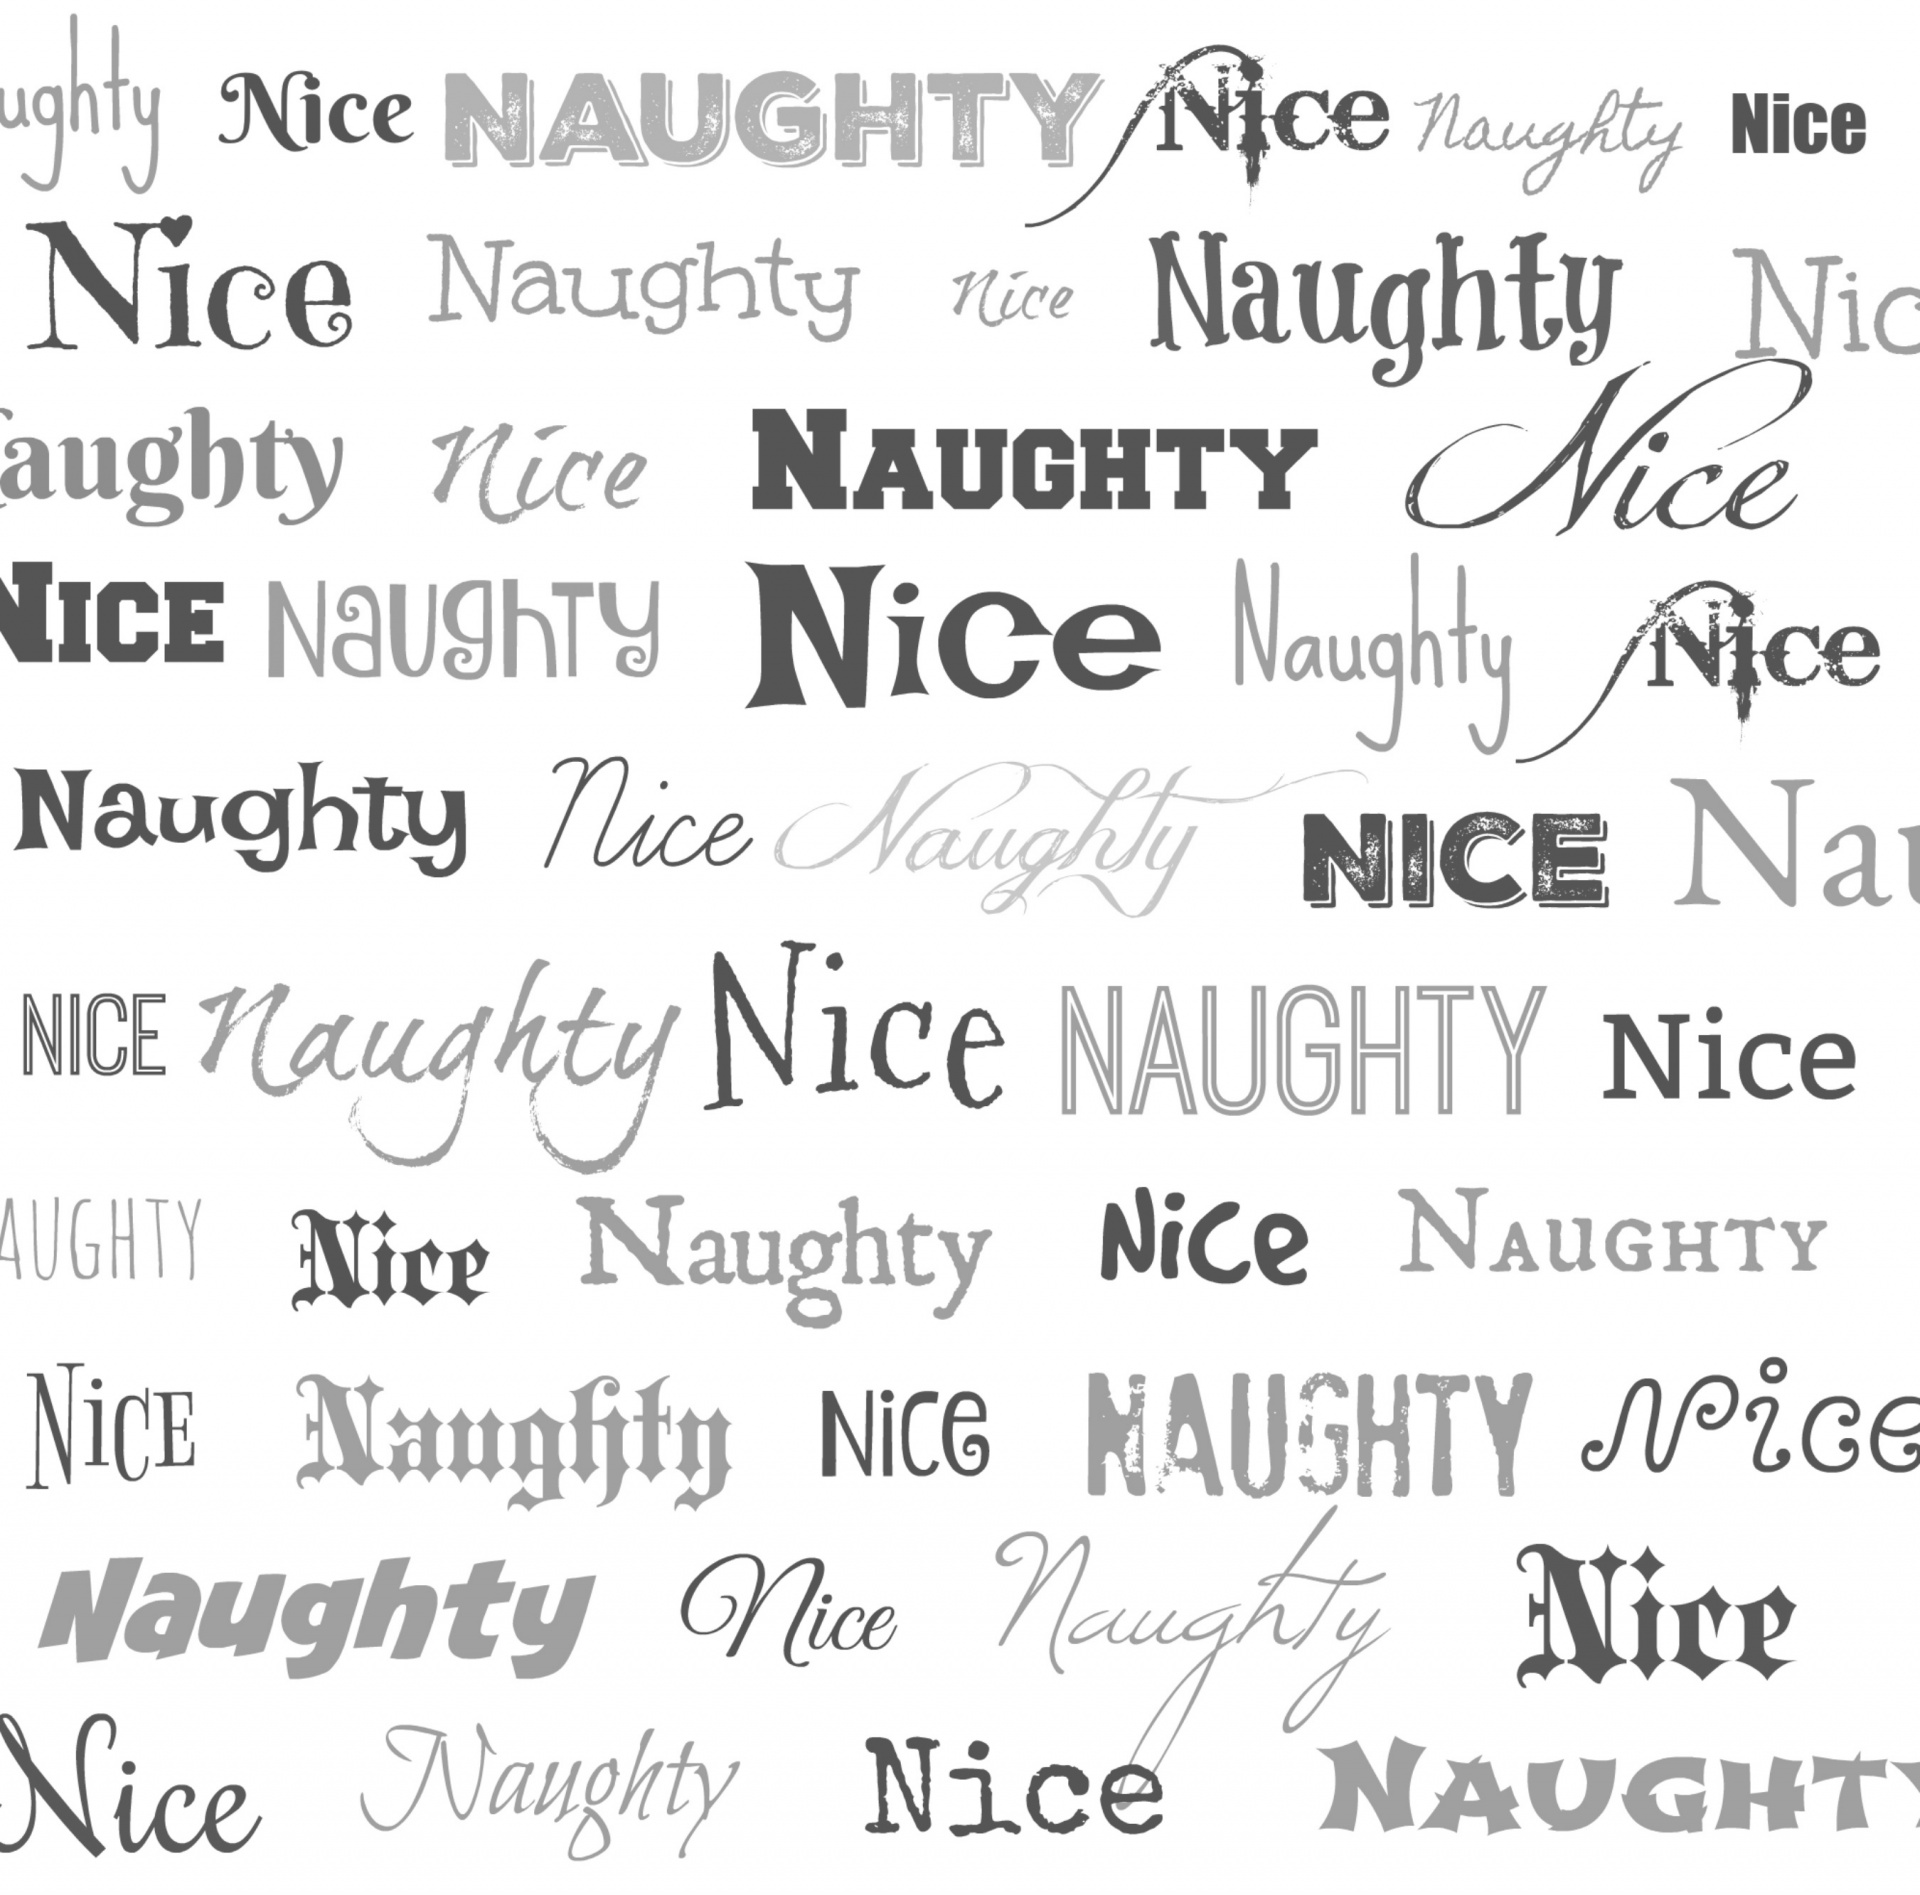 collection of words in different fonts - naughty or nice - black and white